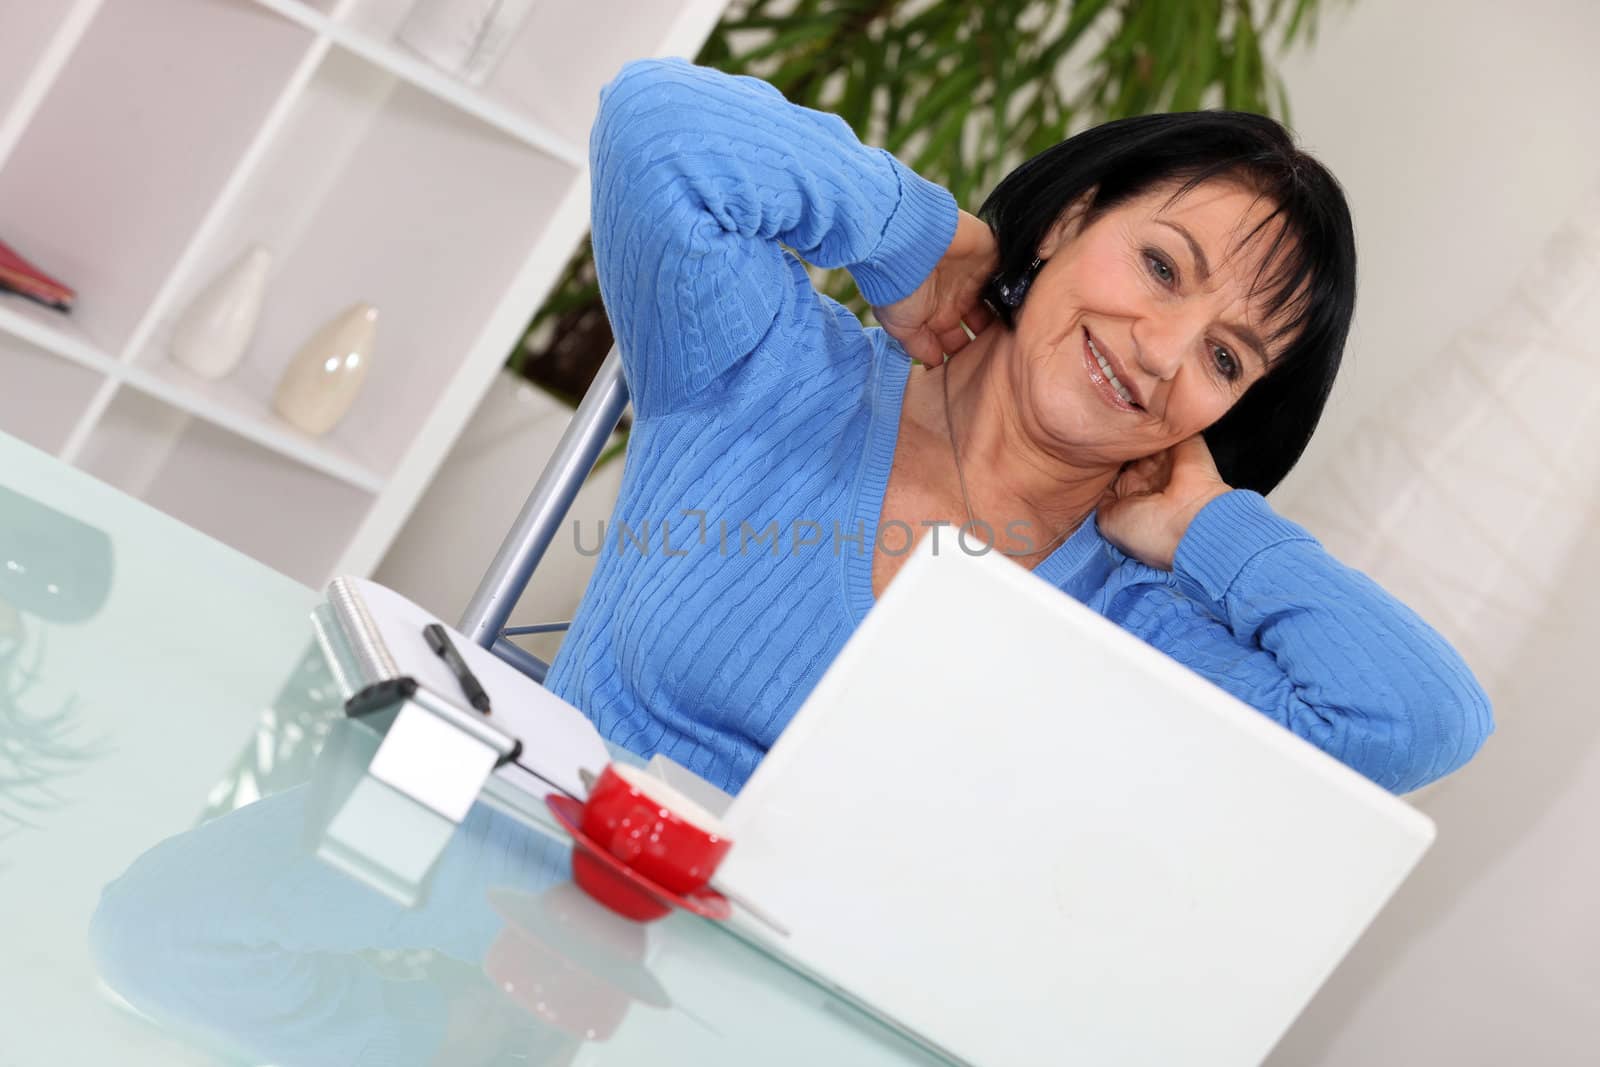 A middle age woman stretching in front of her computer.